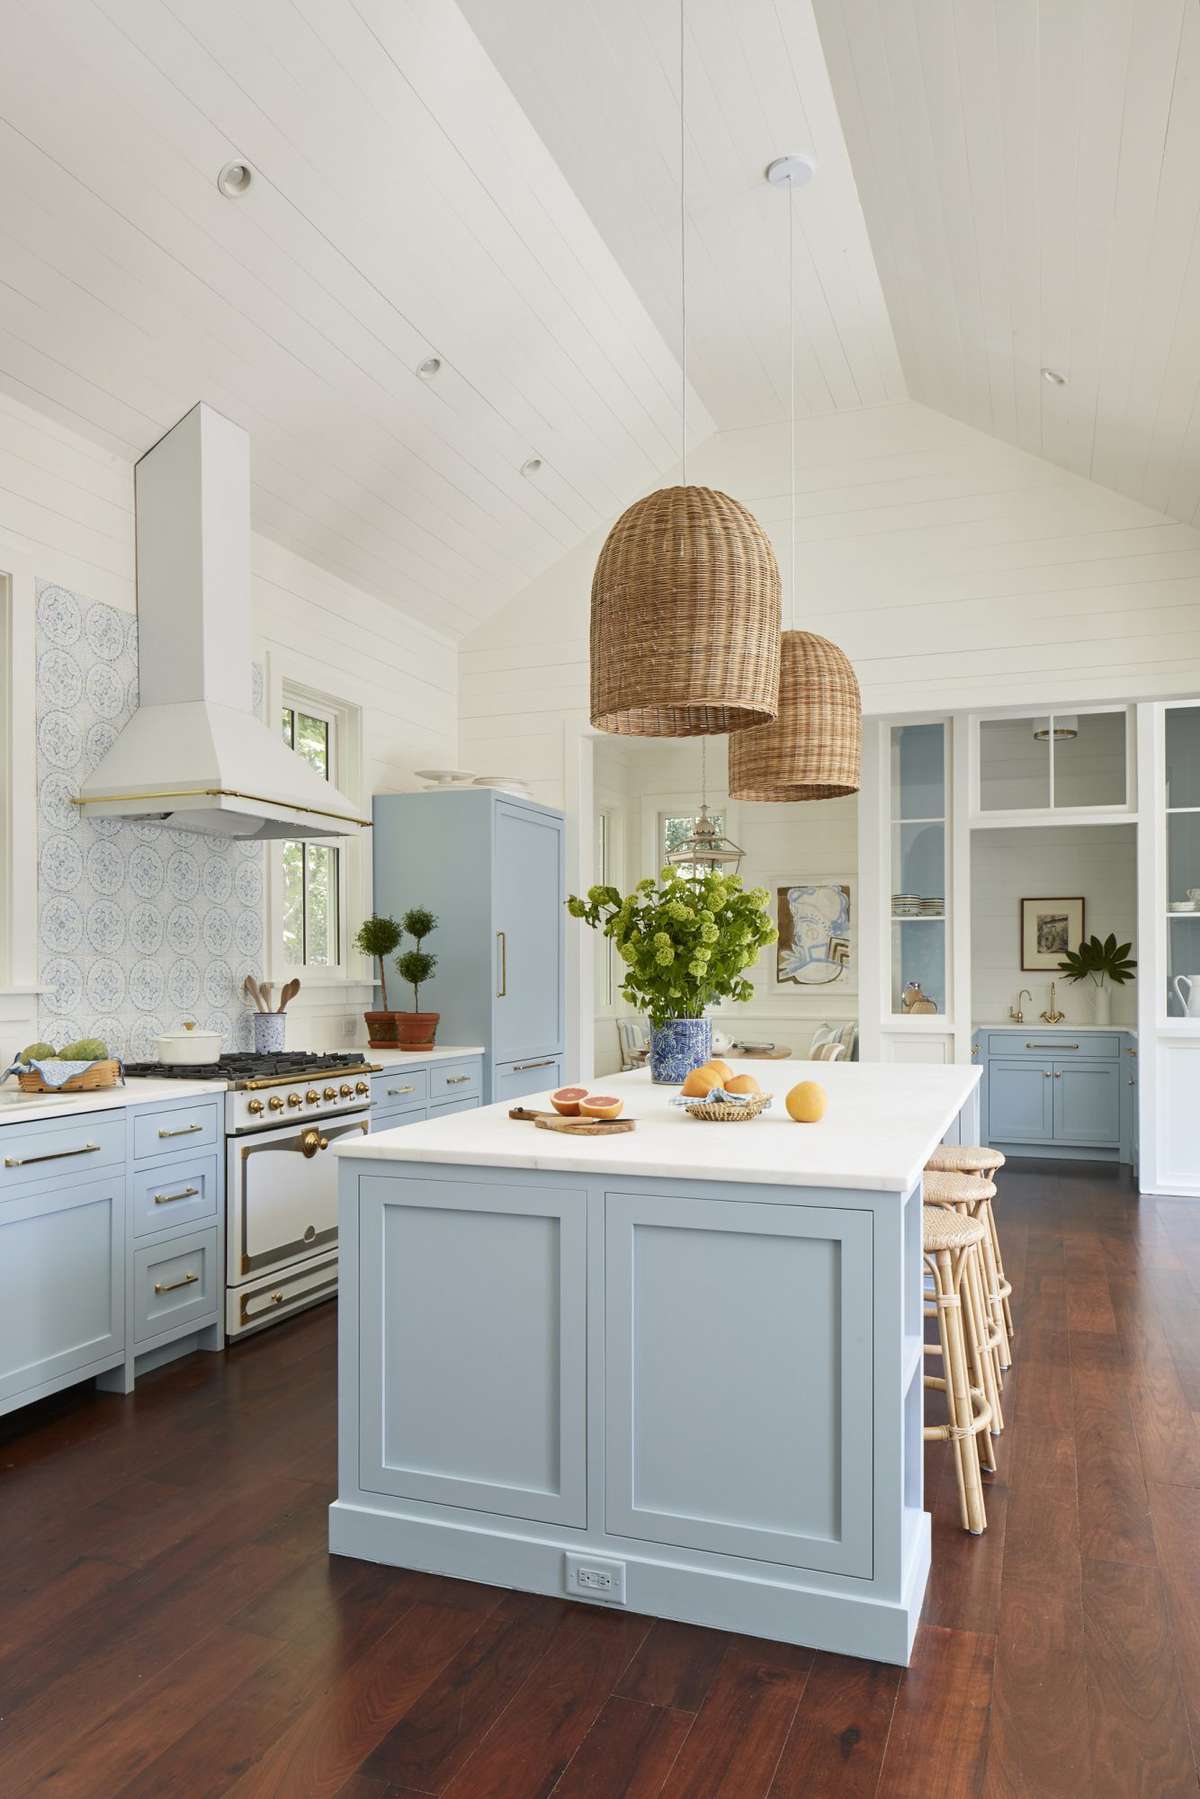 Painted Kitchen Cabinets Are Making a Comeback—Here Are Our ...